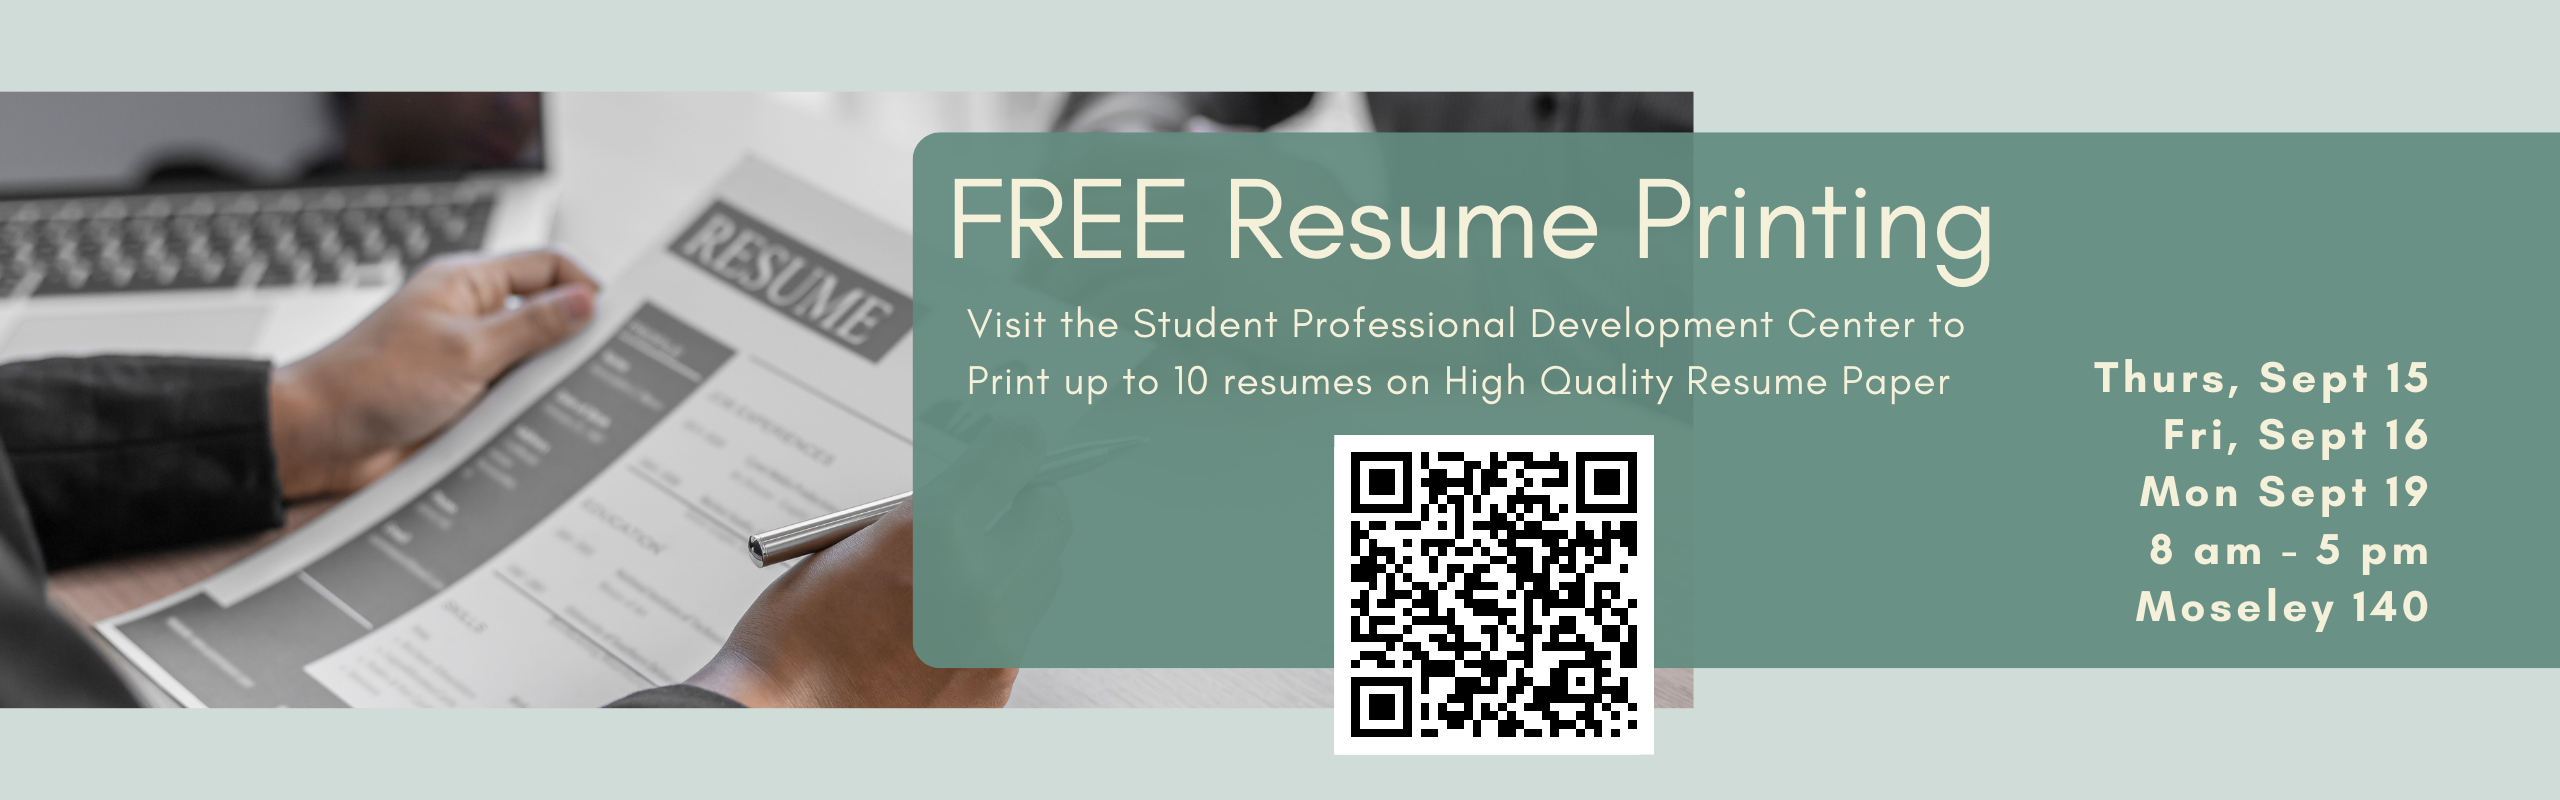 Free resume printing at the SPDC. Check EJN for details